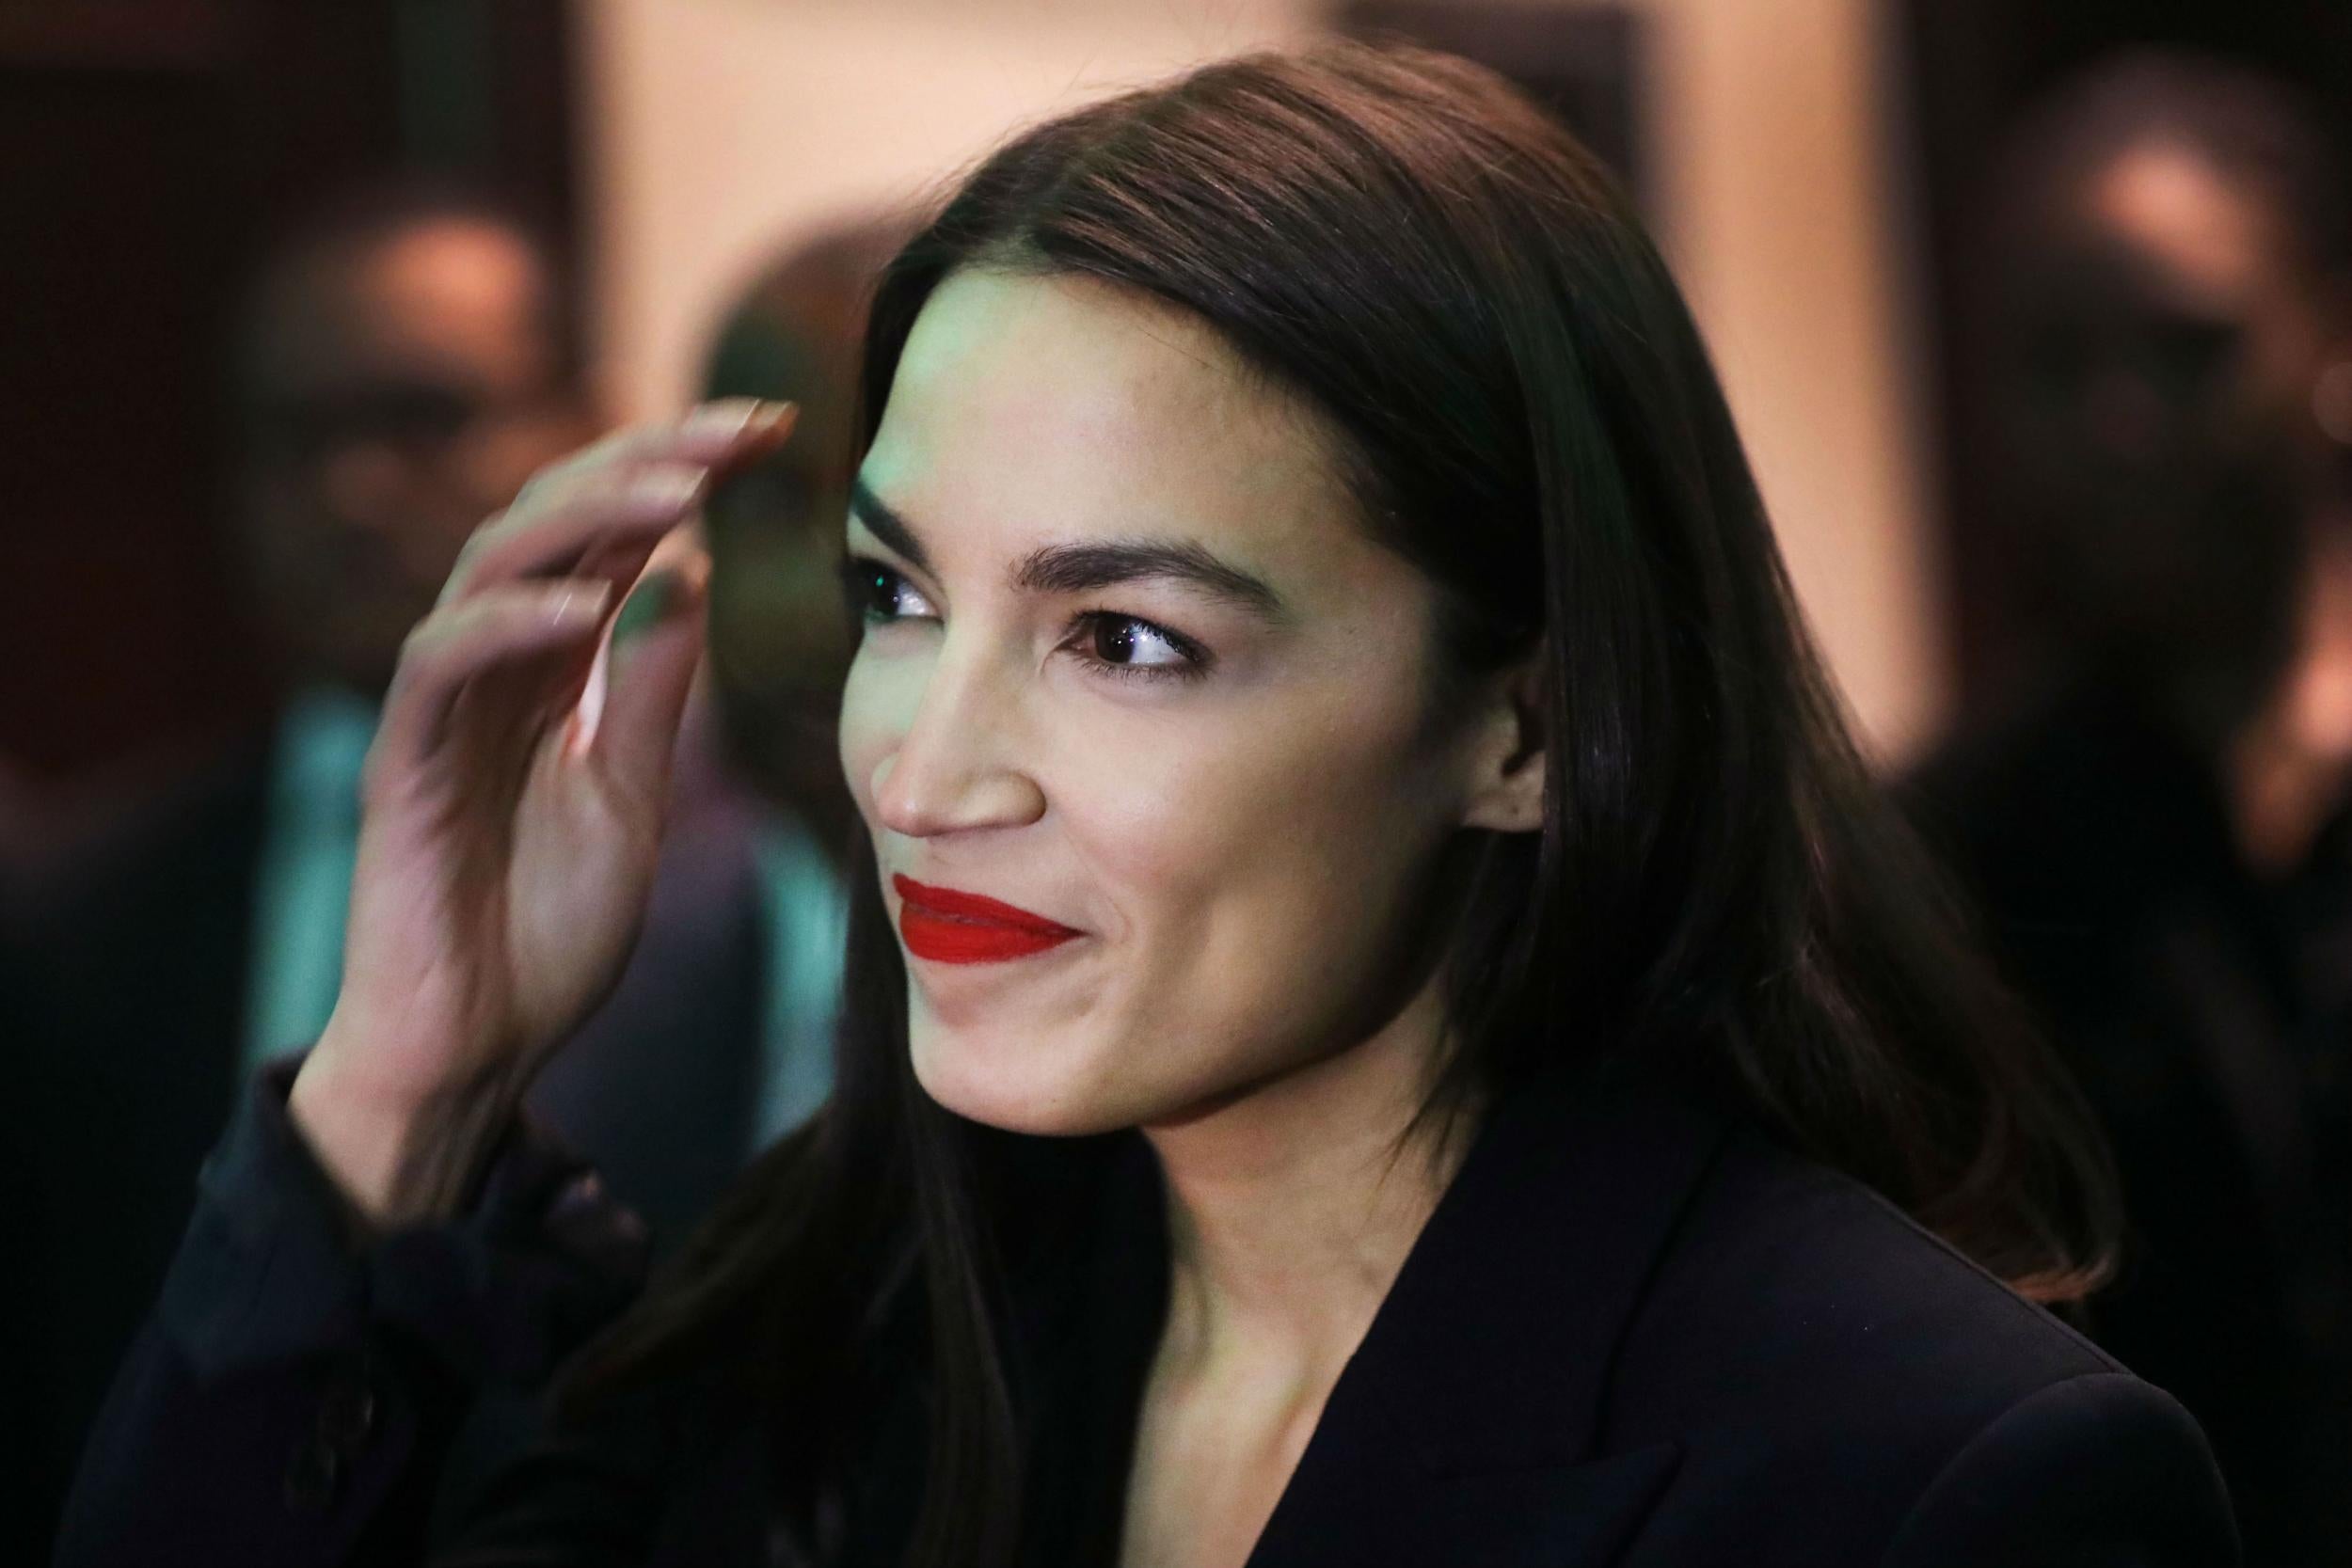 AOC responds to NRA's claim she does not represent 'real Americans'